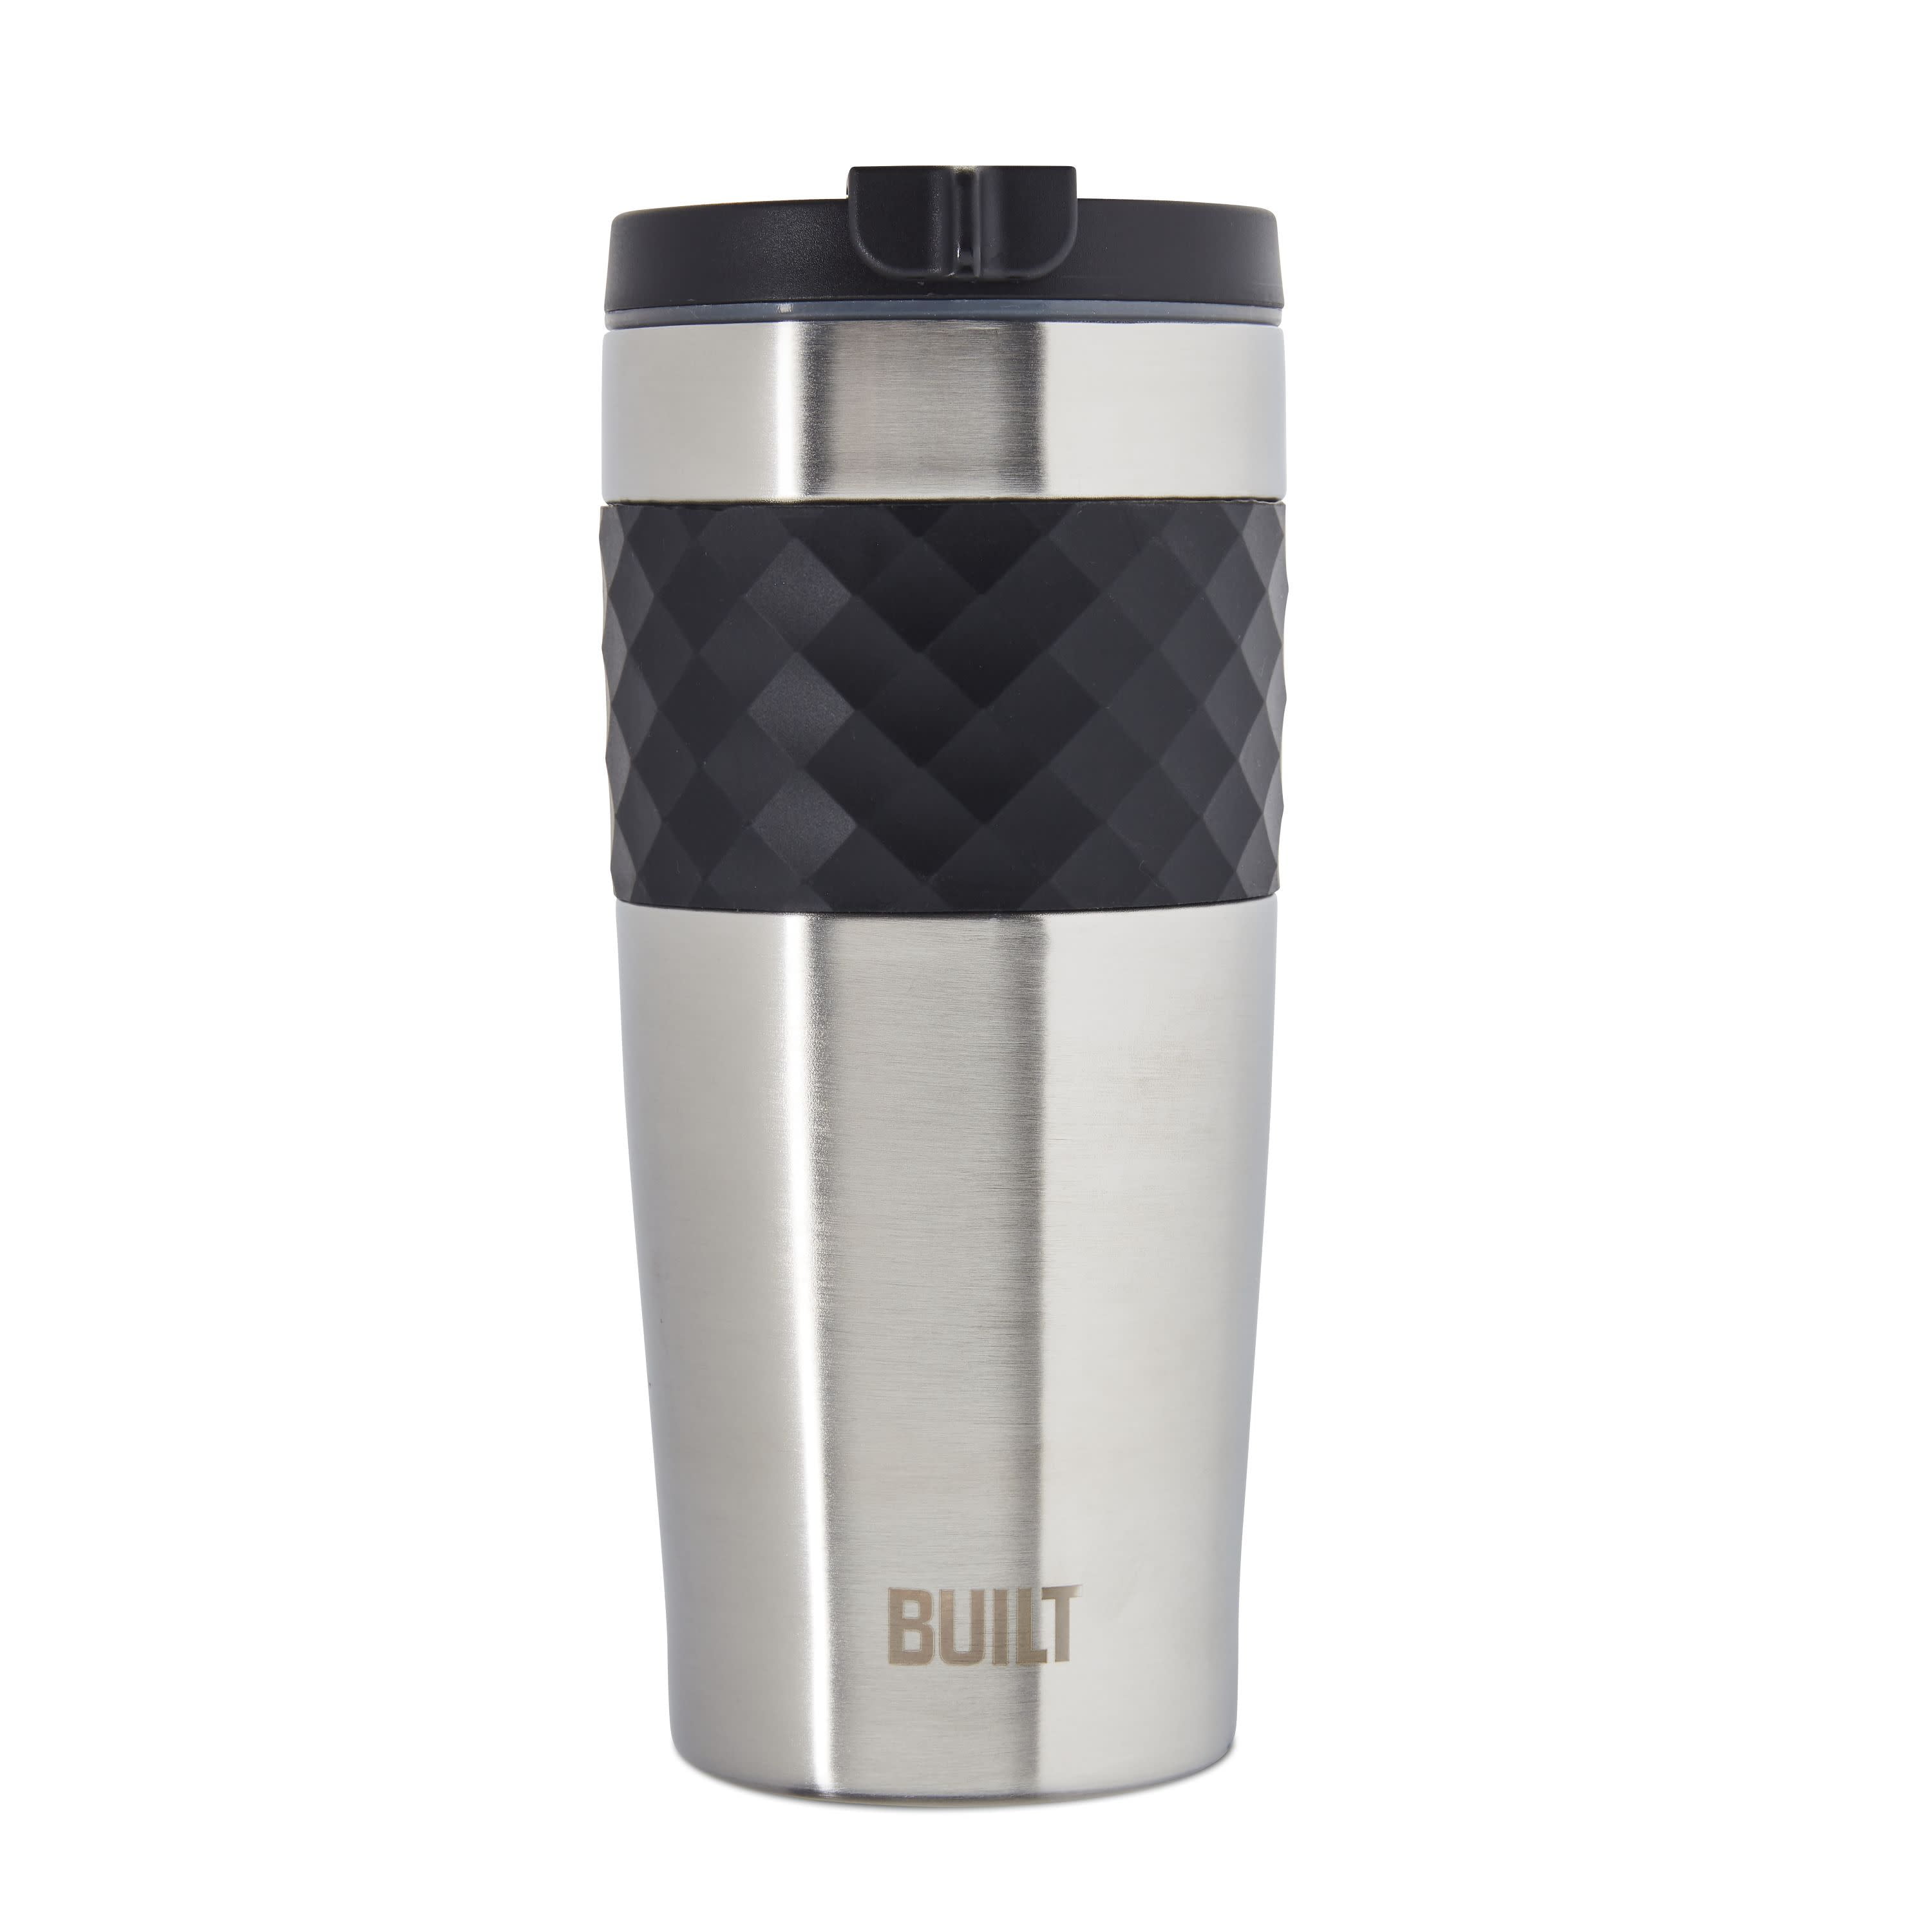 Built 20 Ounce Double Wall Vacuum Sealed Stainless Steel Coffee and Water Tumbler Easy to Clean Tritan Lid with Rotating Splash Guard, Storm Gray